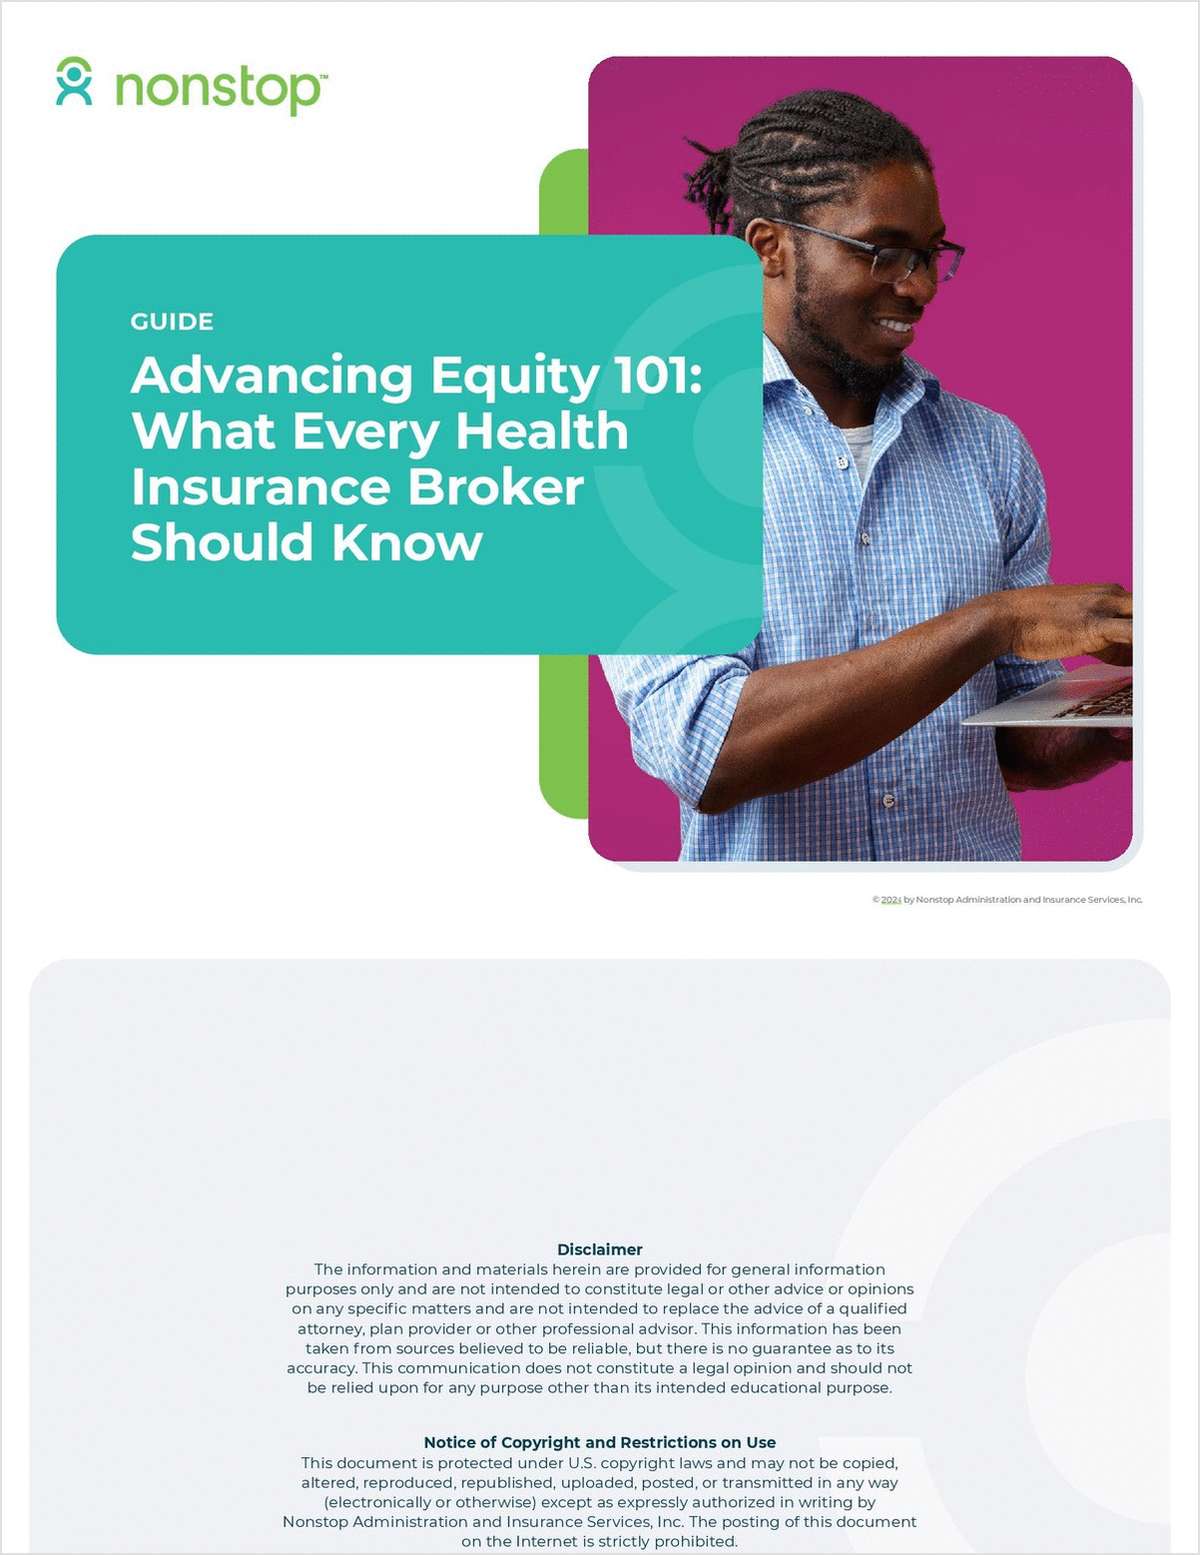 Advancing Equity 101: What Every Health Insurance Broker Should Know link